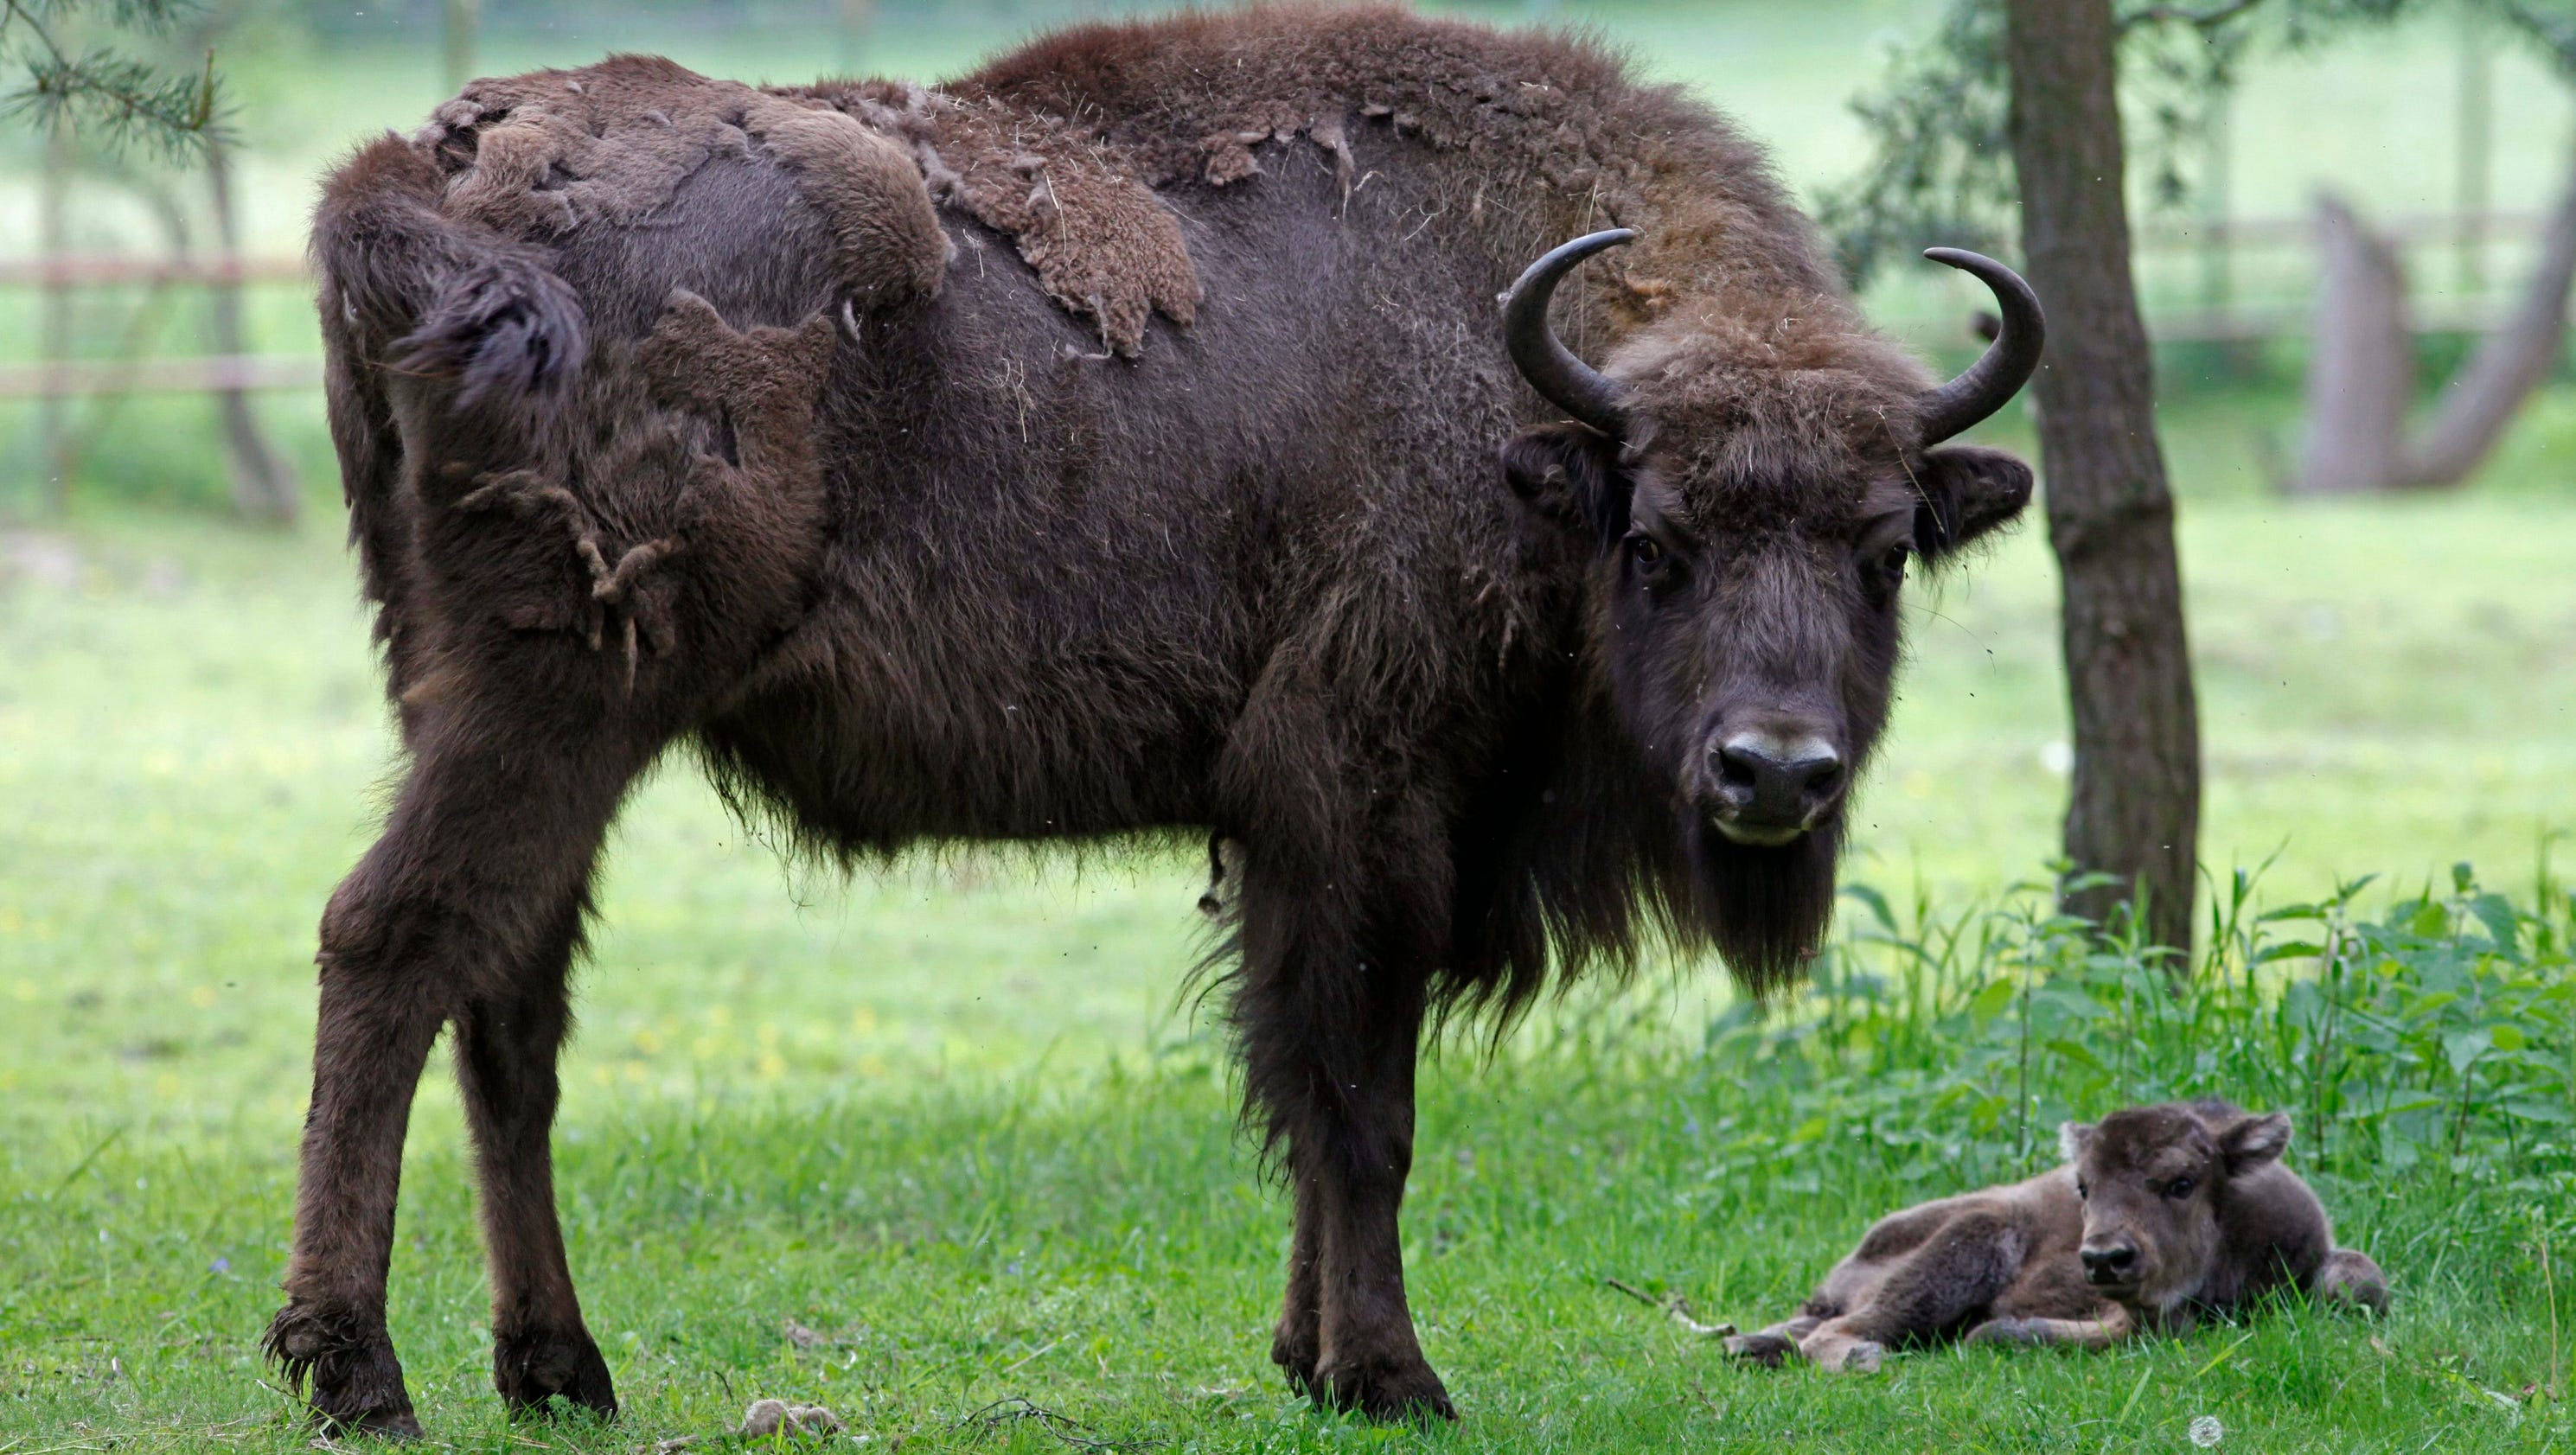 Bison attacks at Yellowstone National Park lead to warnings